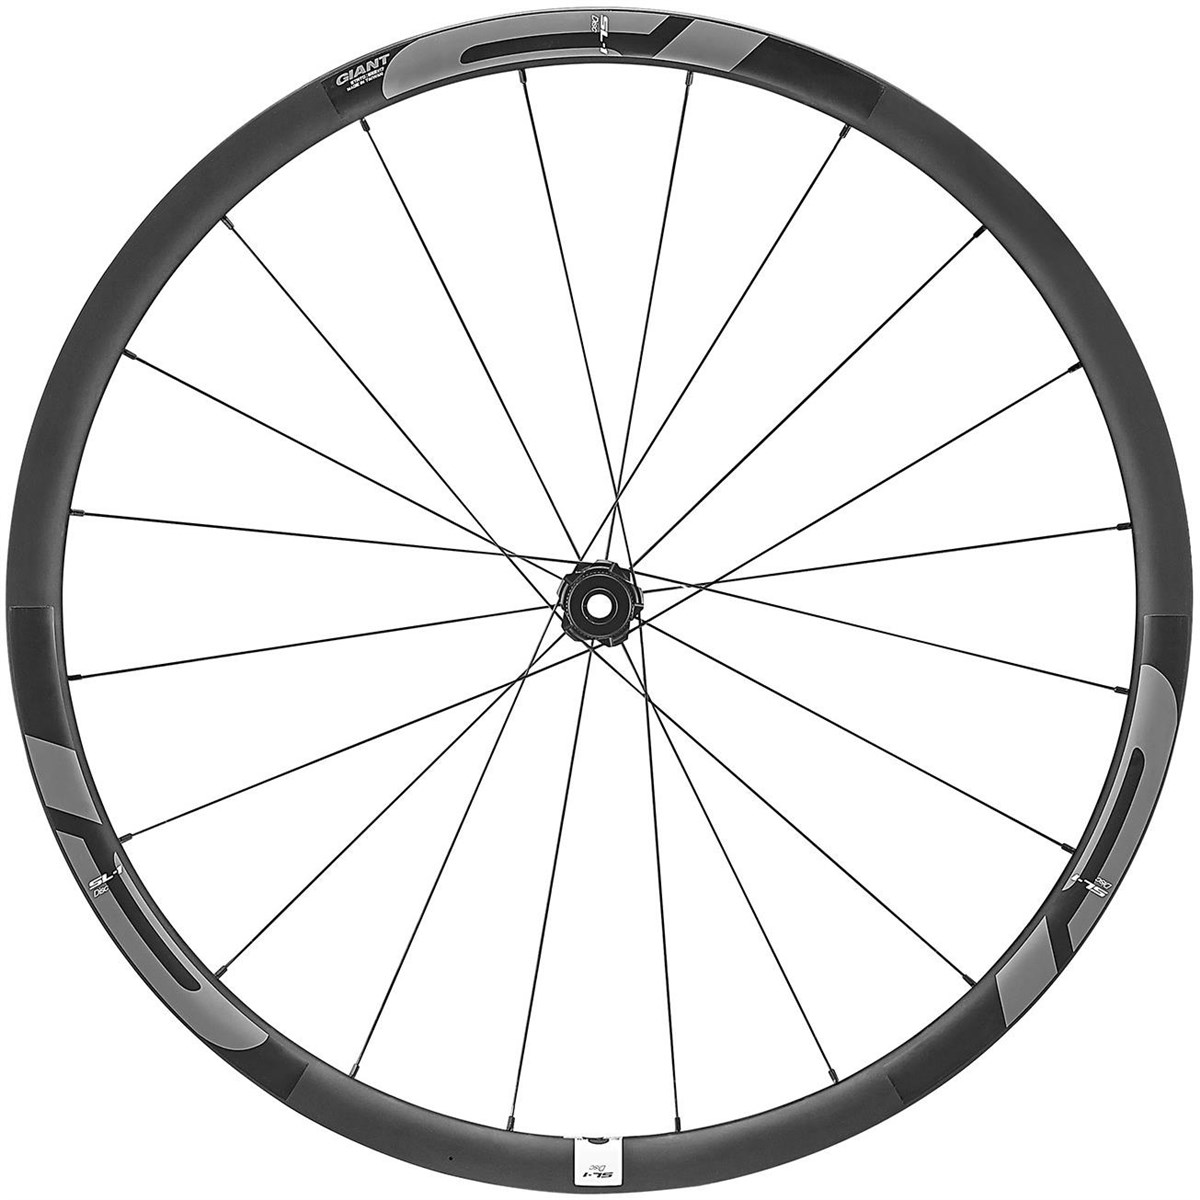 Giant SL 1 Disc Centre-Lock Clincher 700c Road Wheels product image